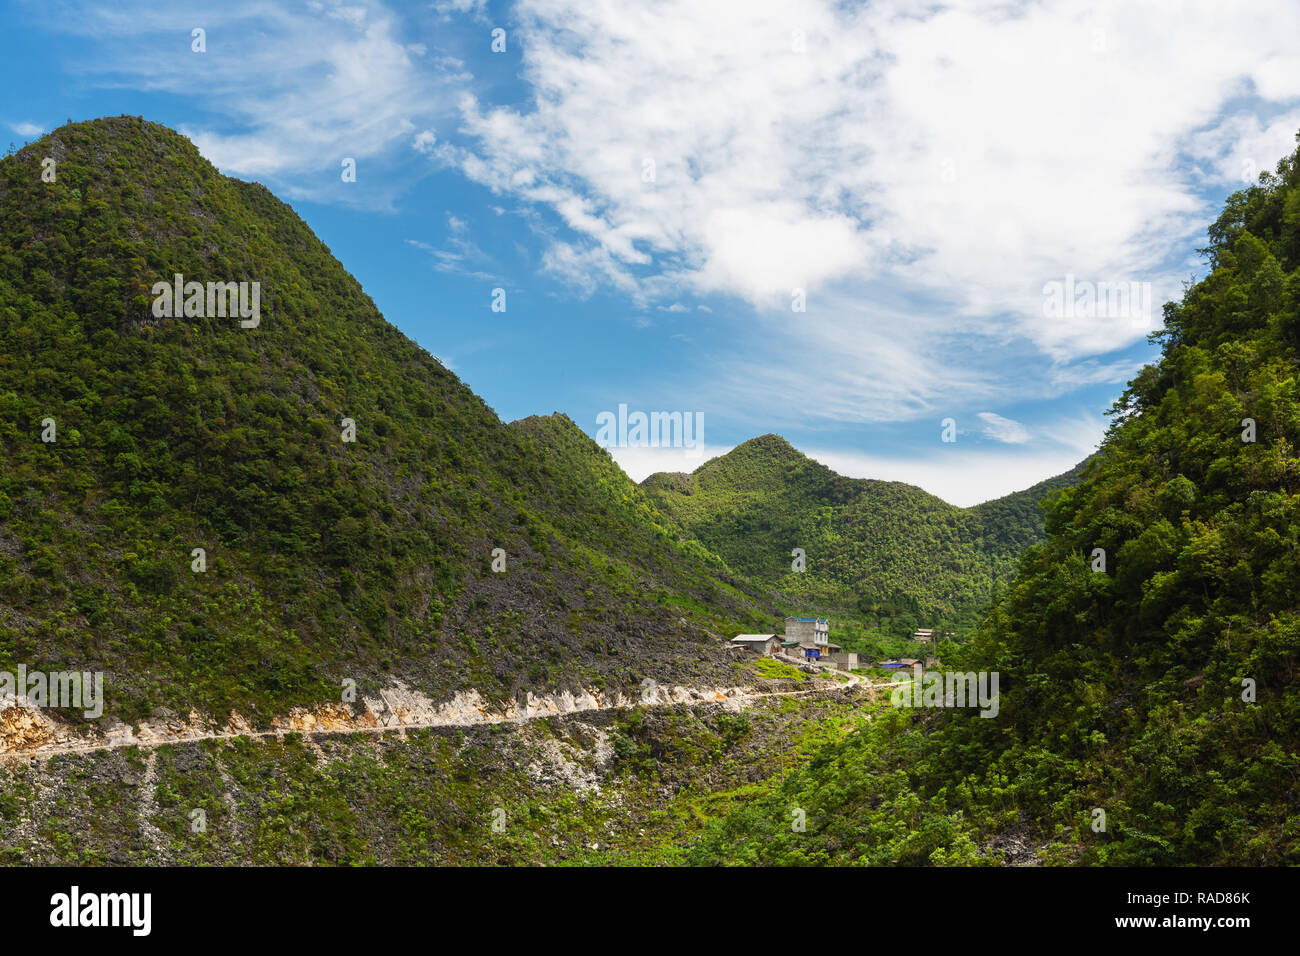 Cliffside road and small village in Ha Giang Loop, Ha Giang Province, Vietnam, Asia Stock Photo